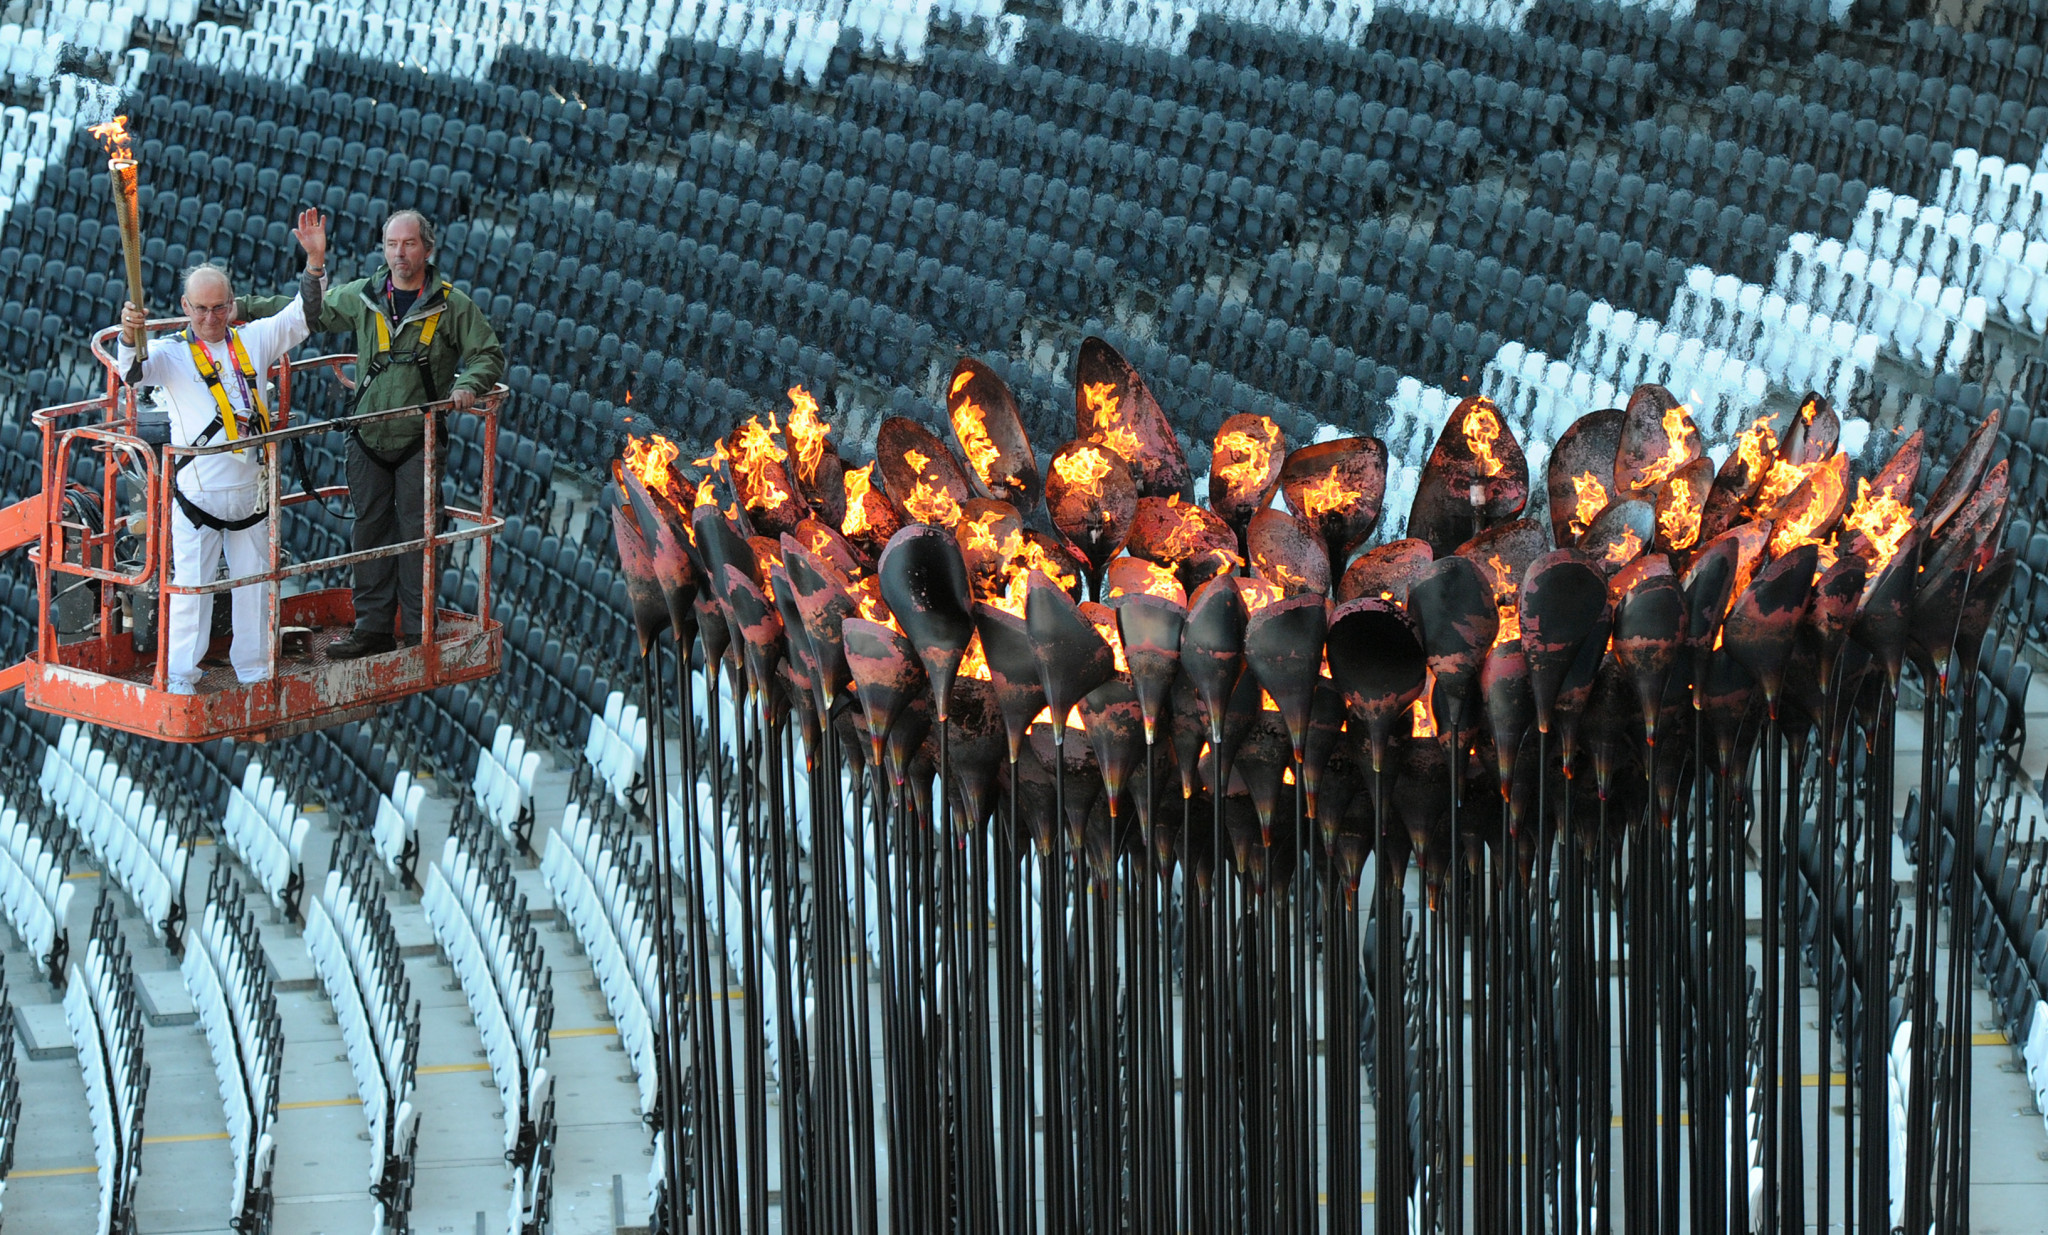 The 2012 cauldron was re-lit by Austin Playfoot, a Torchbearer in 1948 after it had been re-positioned in the stadium after the Opening Ceremony ©Getty Images